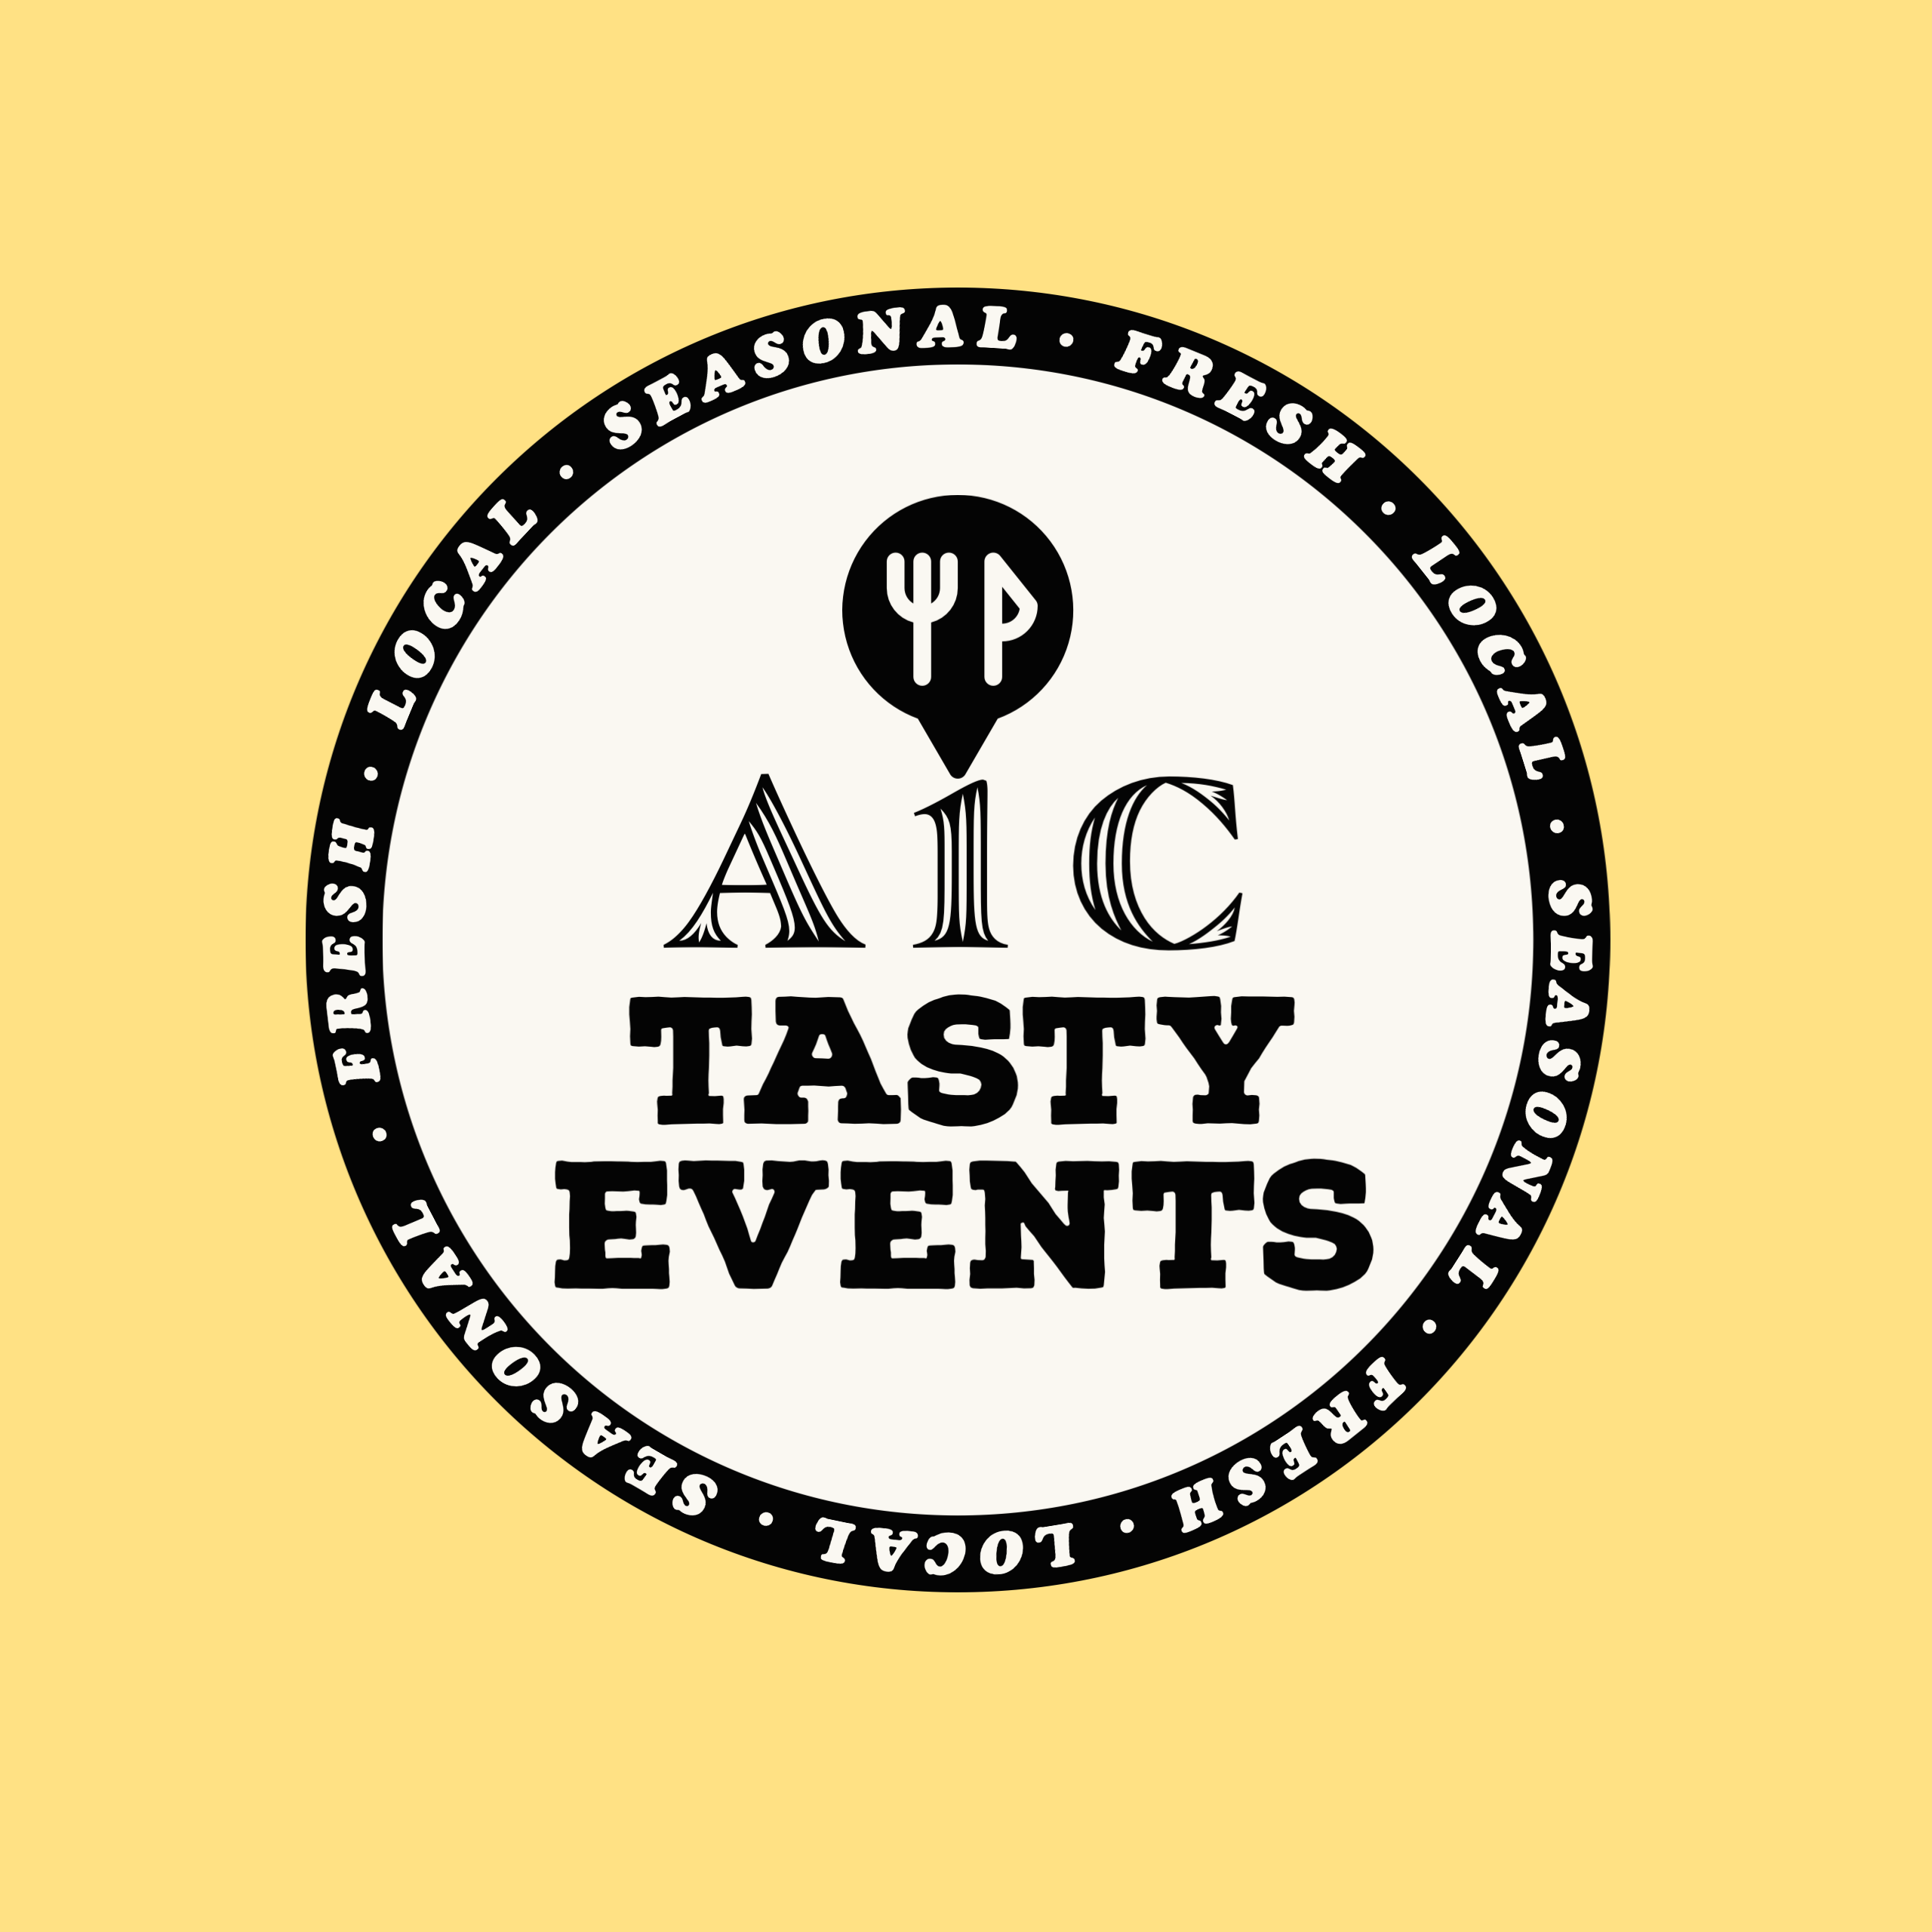 A & C Tasty Events